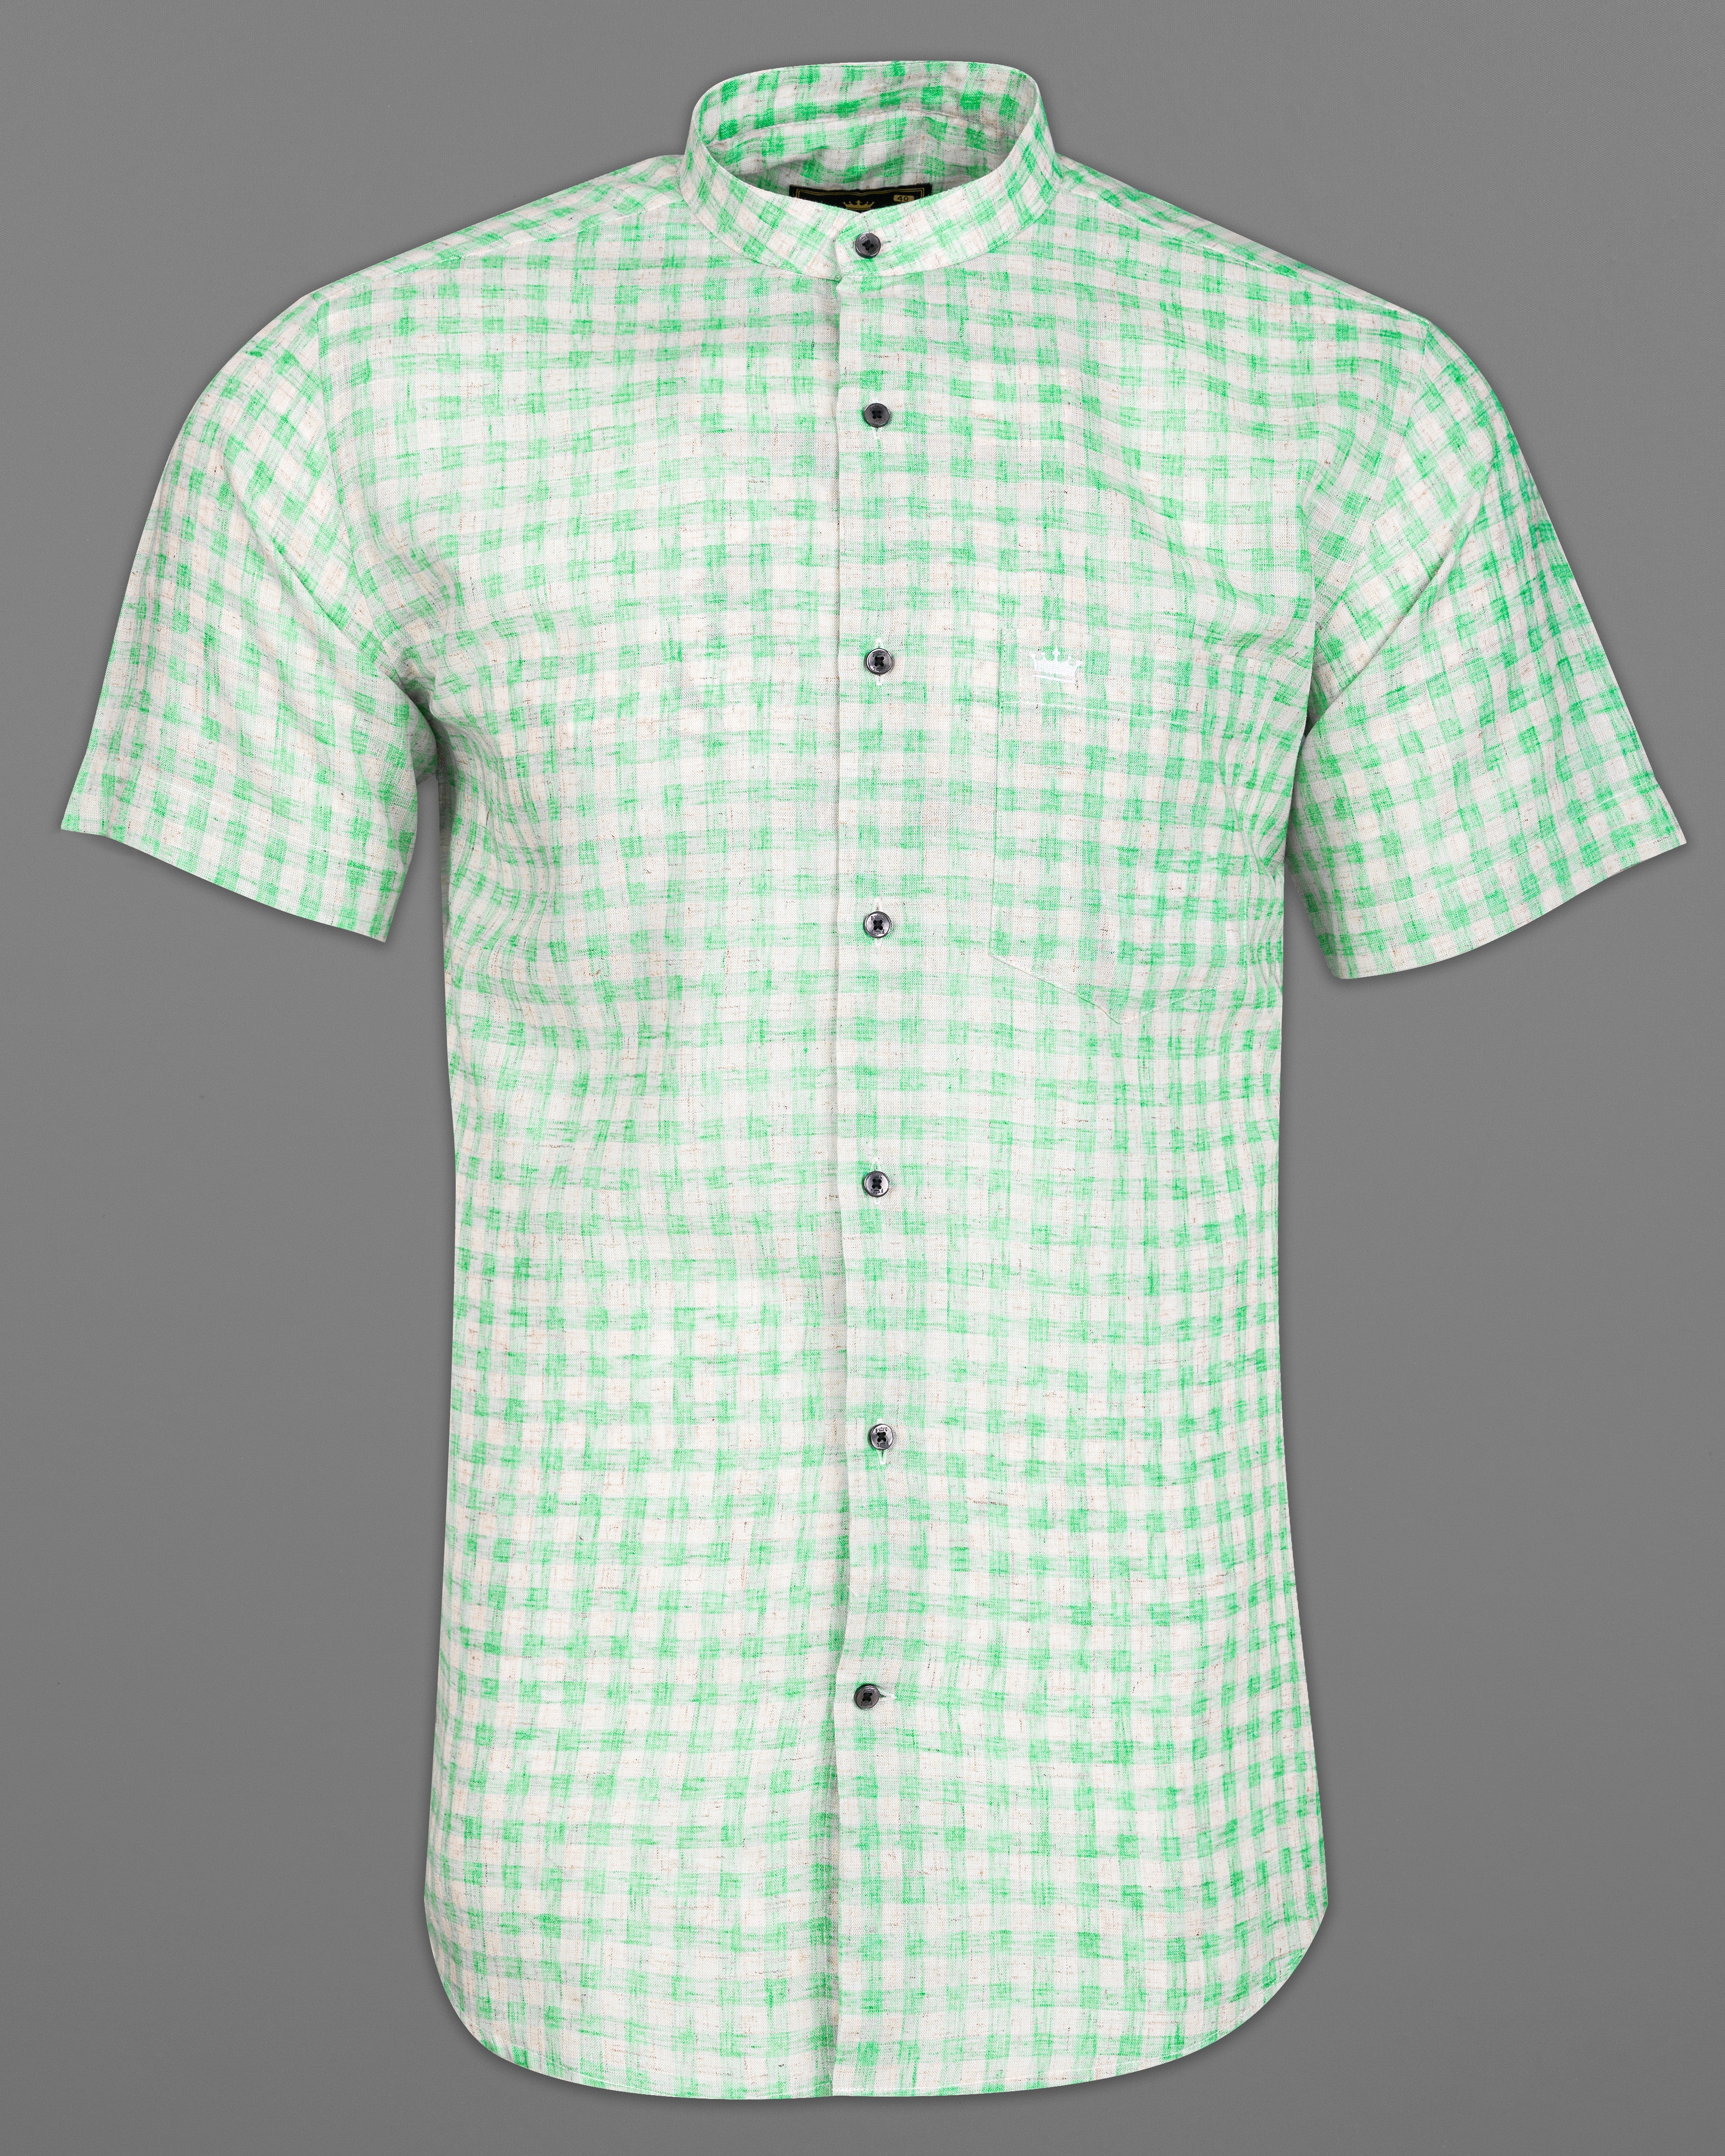 Turquoise Green with Mercury Gray Checkered Luxurious Linen Half Slavees Shirt 9644-M-BLK-SS-H-38, 9644-M-BLK-SS-H-39, 9644-M-BLK-SS-H-40, 9644-M-BLK-SS-H-42, 9644-M-BLK-SS-H-44, 9644-M-BLK-SS-H-46, 9644-M-BLK-SS-H-48, 9644-M-BLK-SS-H-50, 9644-M-BLK-SS-H-52